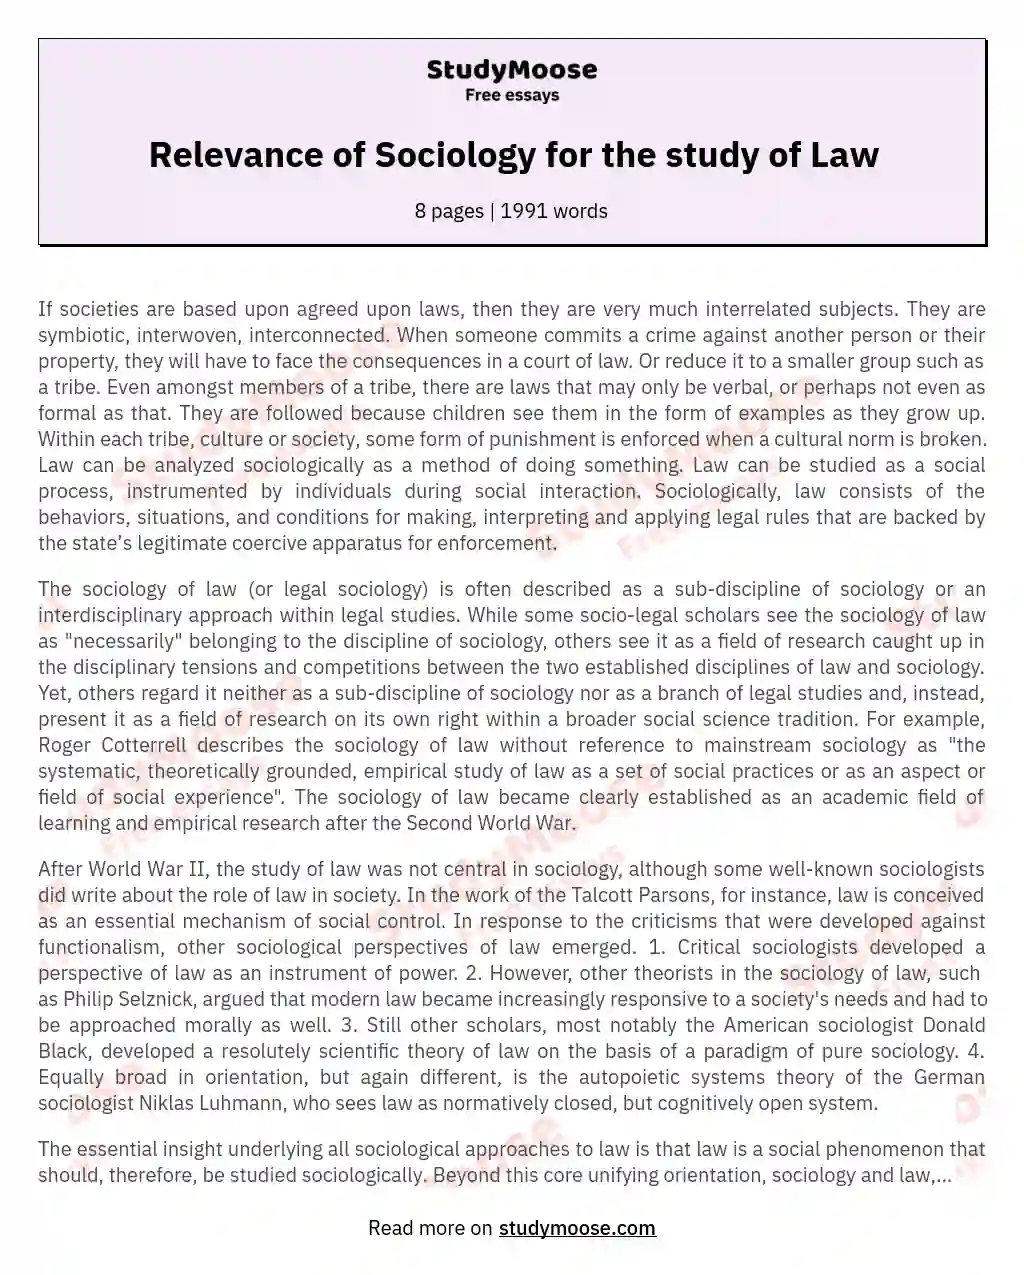 Relevance of Sociology for the study of Law essay